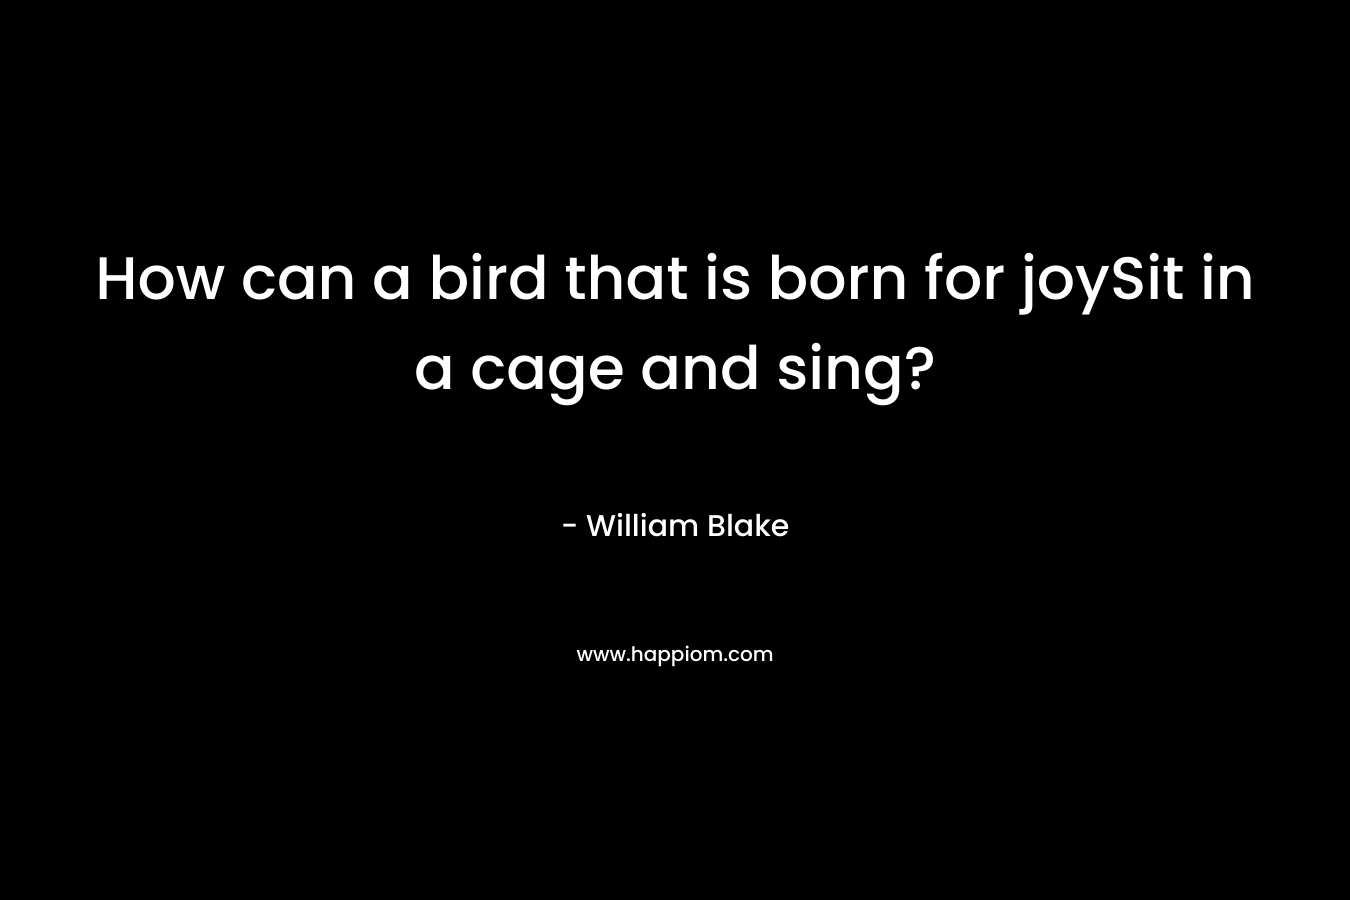 How can a bird that is born for joySit in a cage and sing?